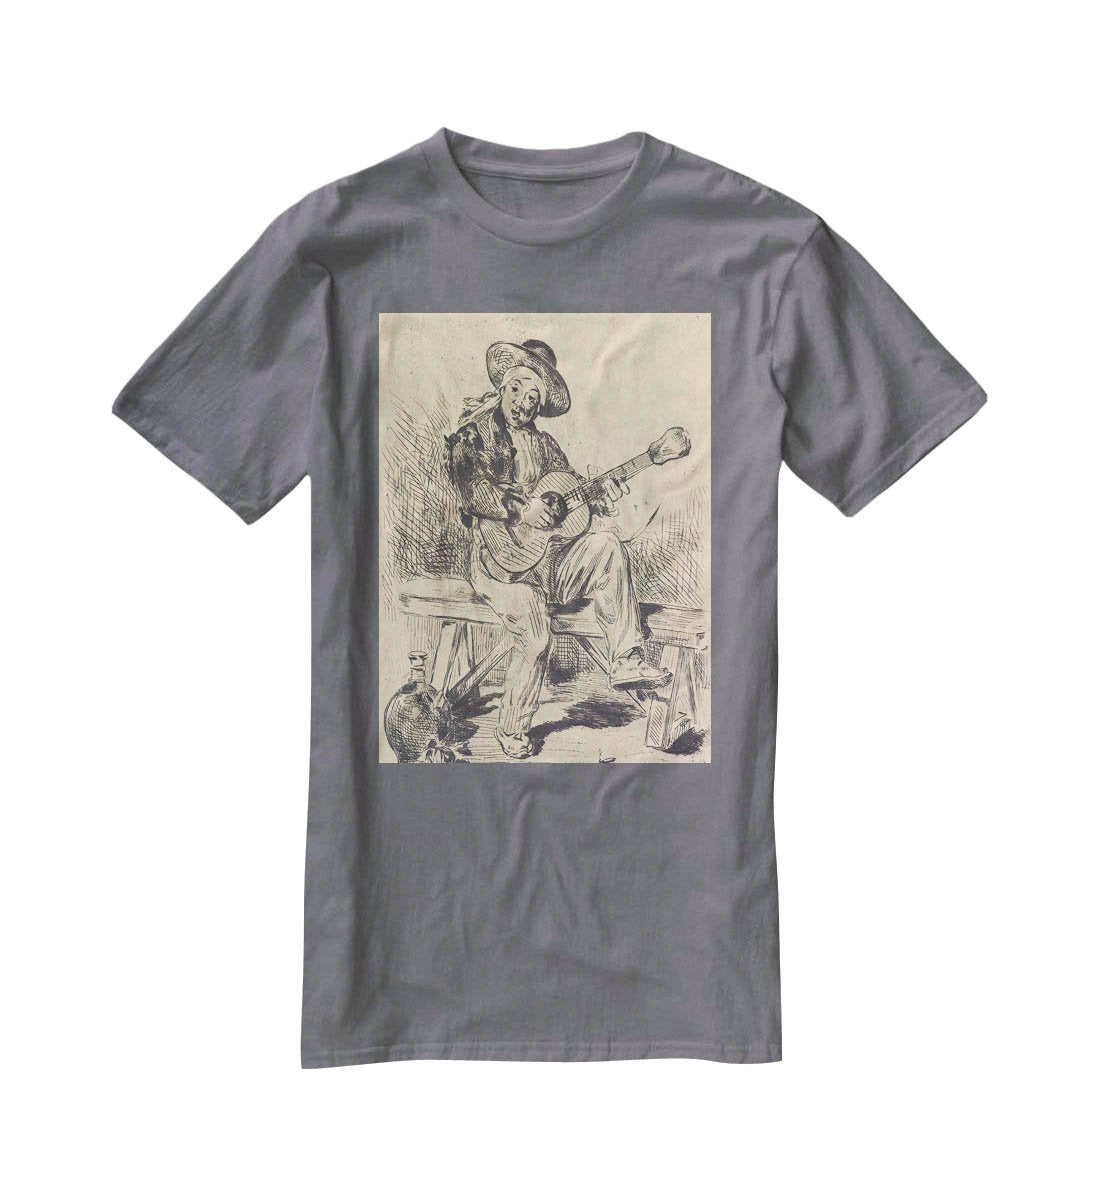 The guitar Player by Manet T-Shirt - Canvas Art Rocks - 3